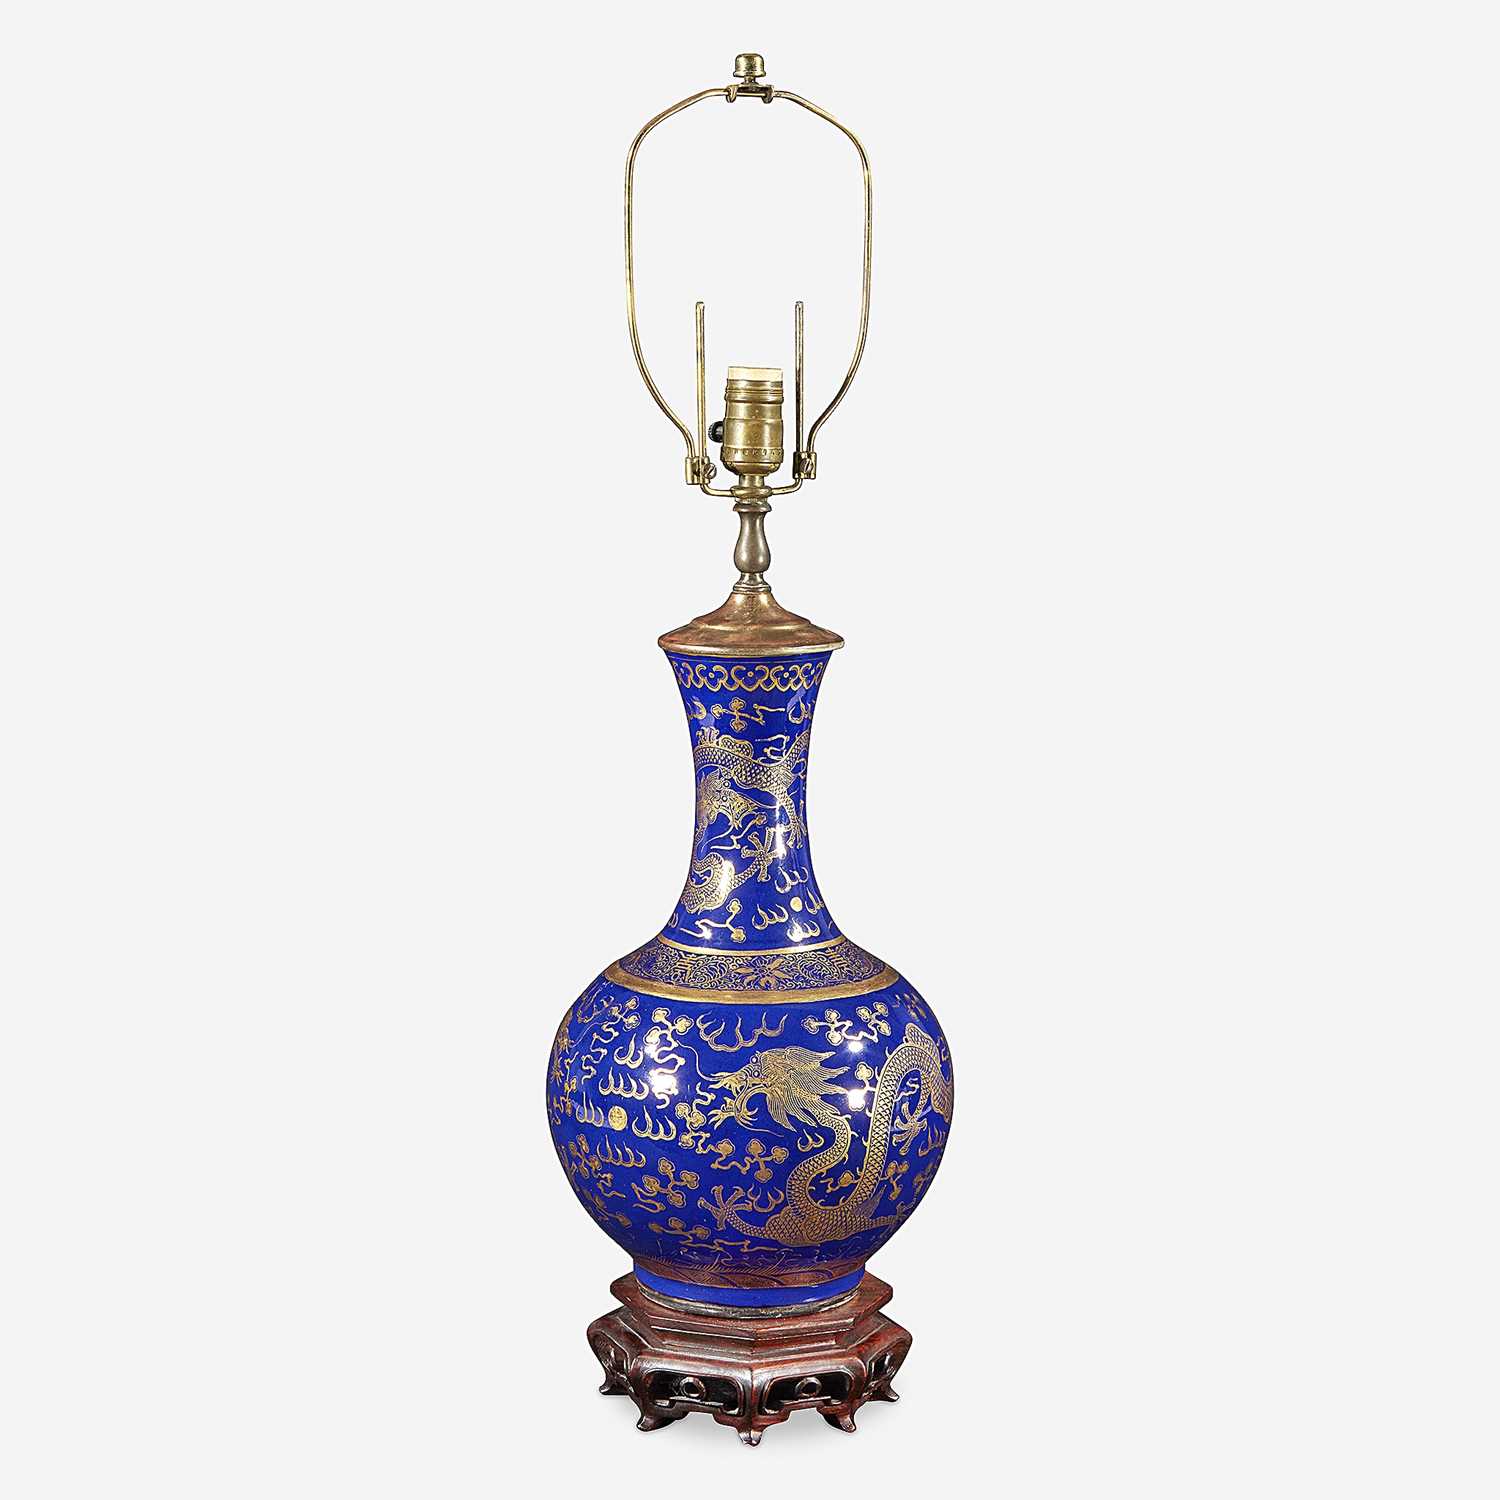 Lot 74 - A Chinese gilt-decorated cobalt blue porcelain “Dragon” bottle vase, mounted as a lamp